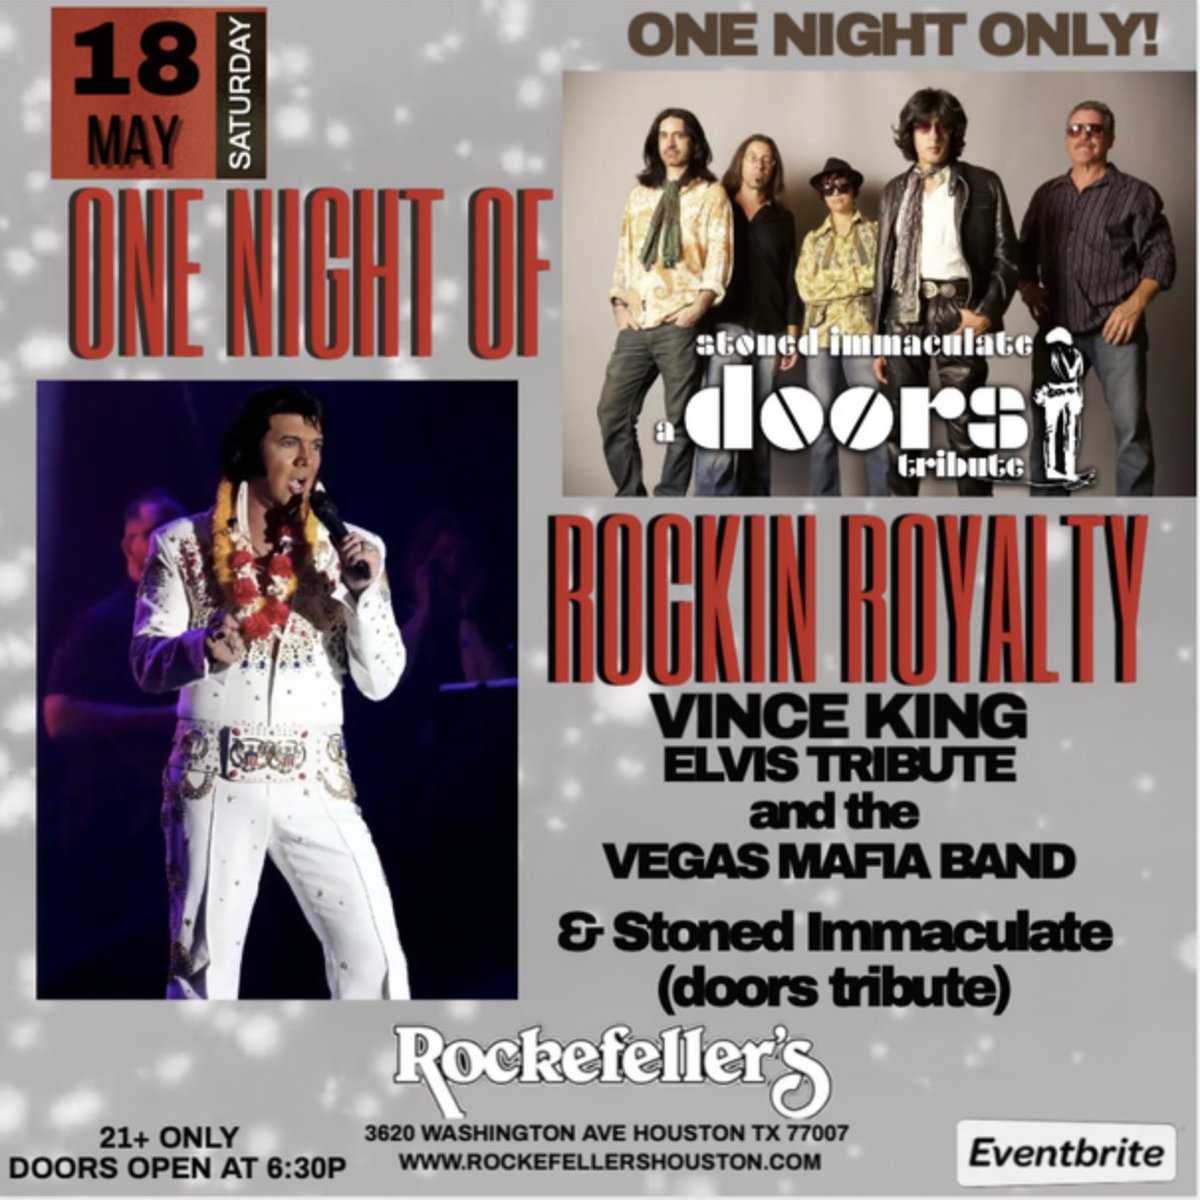 VINCE KING's #ELVIS Tribute and Stoned Immaculate (the doors) Tribute in one night? YES PLEASE! MAY 18th at Rockefellers Houston - tix on sale now at Eventbrite while they last! #doors #elvispresley #tribute #livemusic @eventbrite